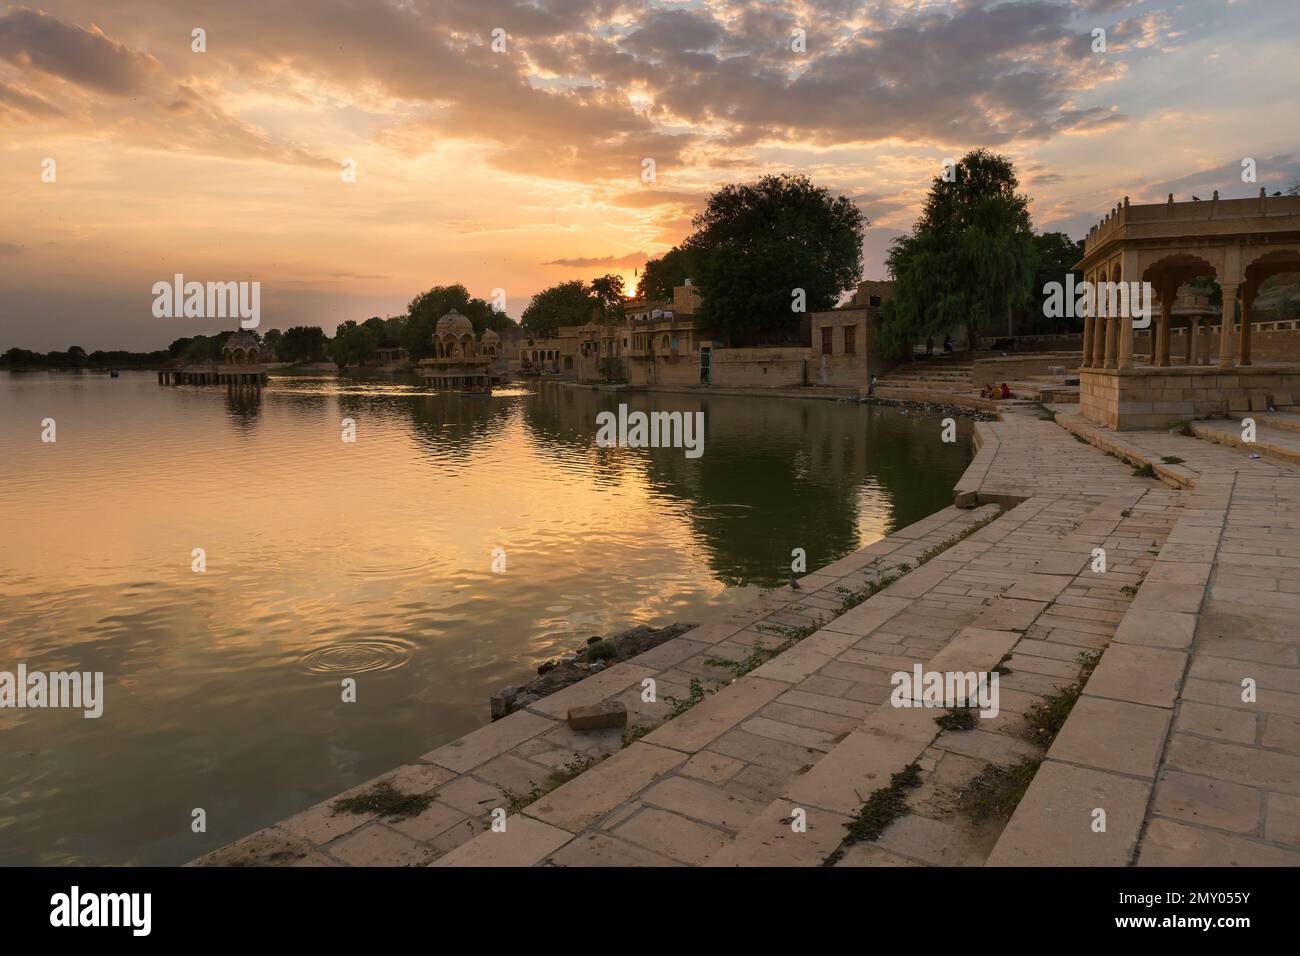 Beautiful sunset at Gadisar lake, Jaisalmer, Rajasthan, India. Setting sun and colorful clouds in the sky with view of the Gadisar lake. Stock Photo